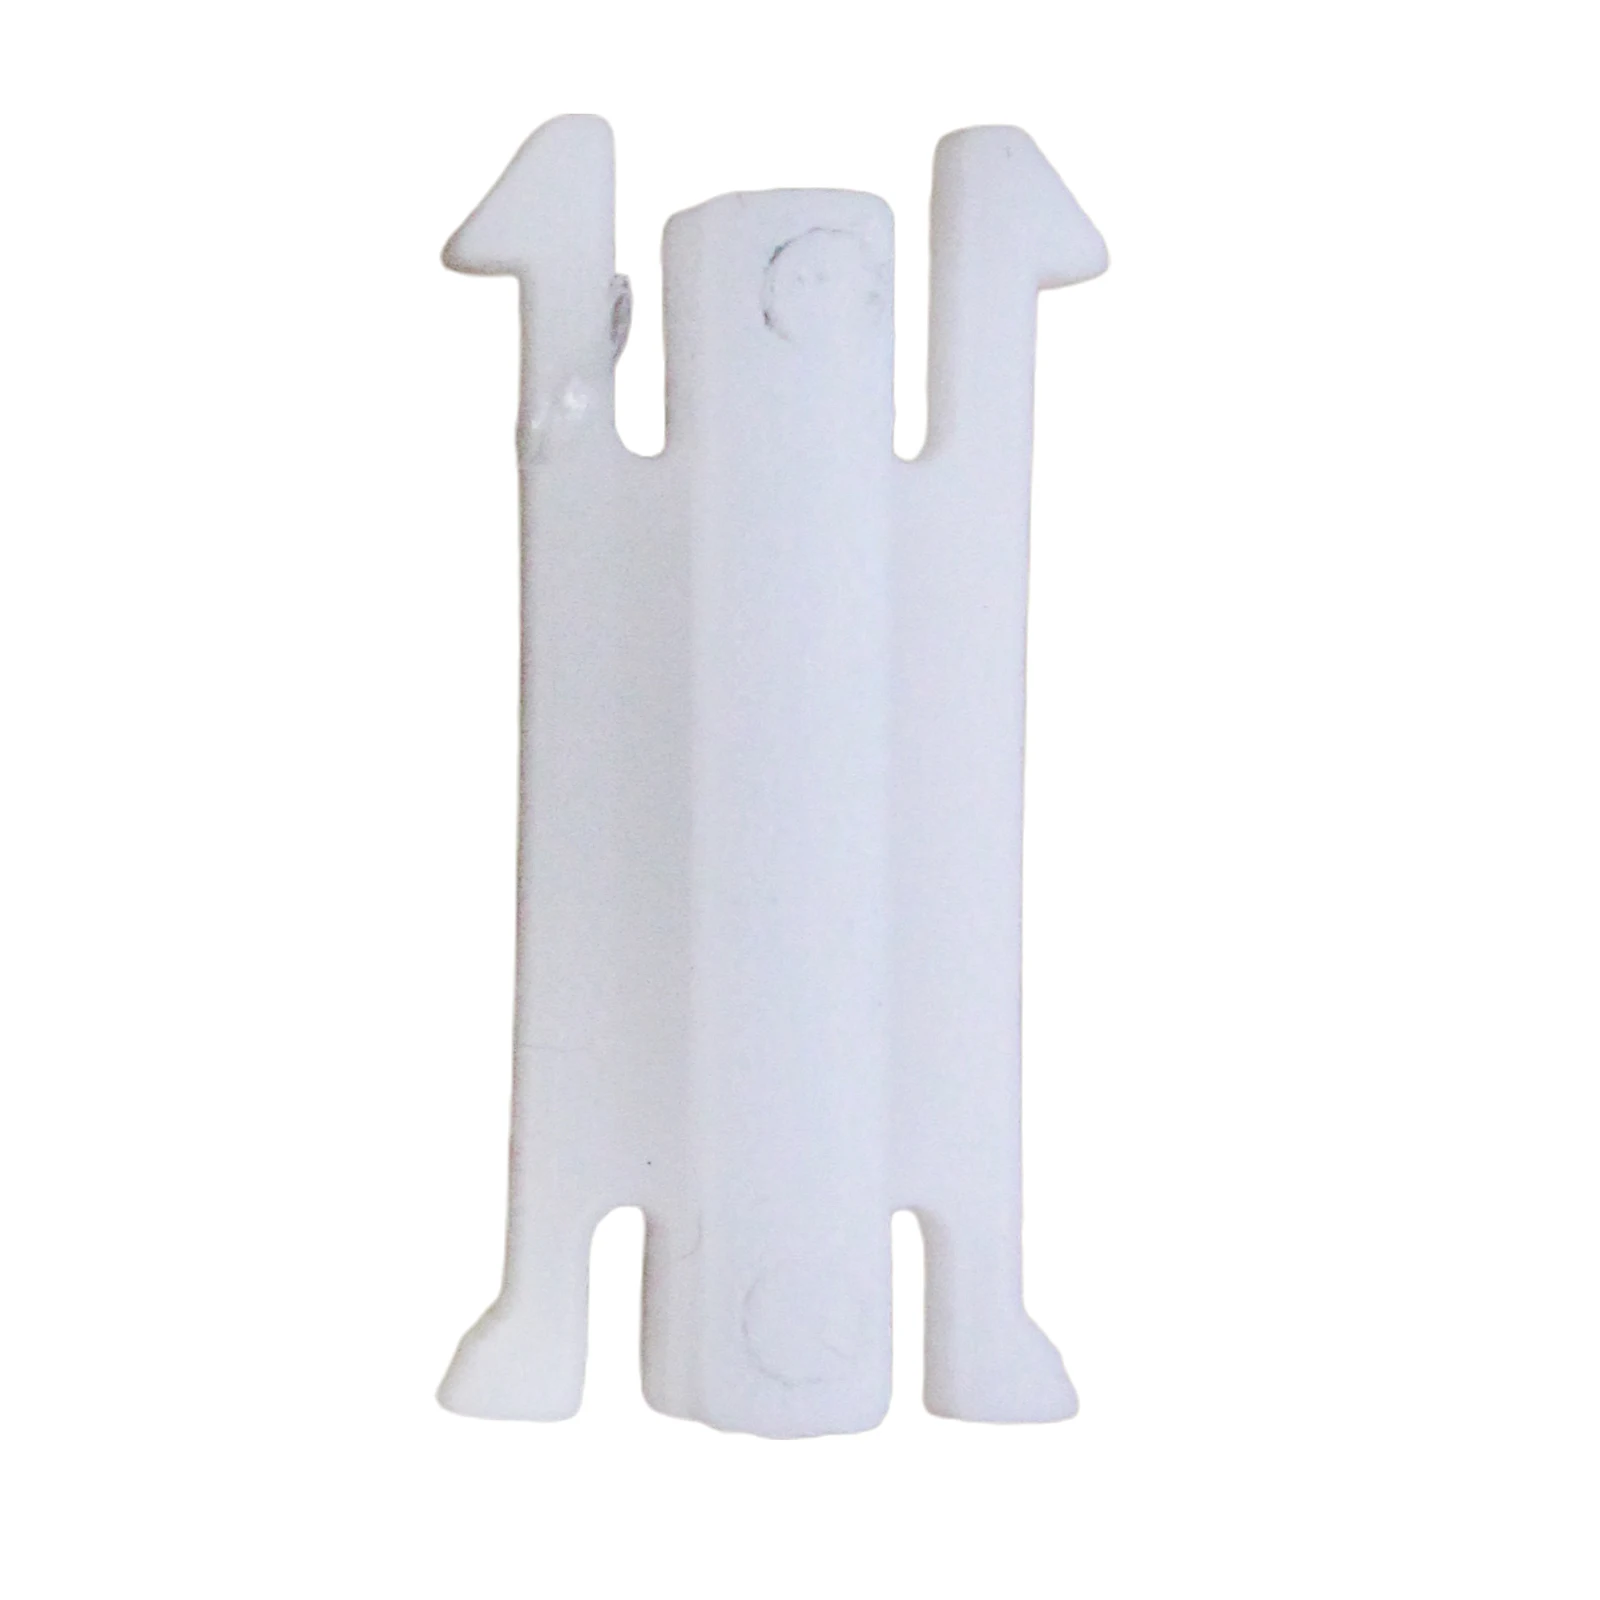 Bonnet Lock Catch Cable Clip 4549268 Fits for Ford Focus & C-Max 2004 -2011 Accessories White